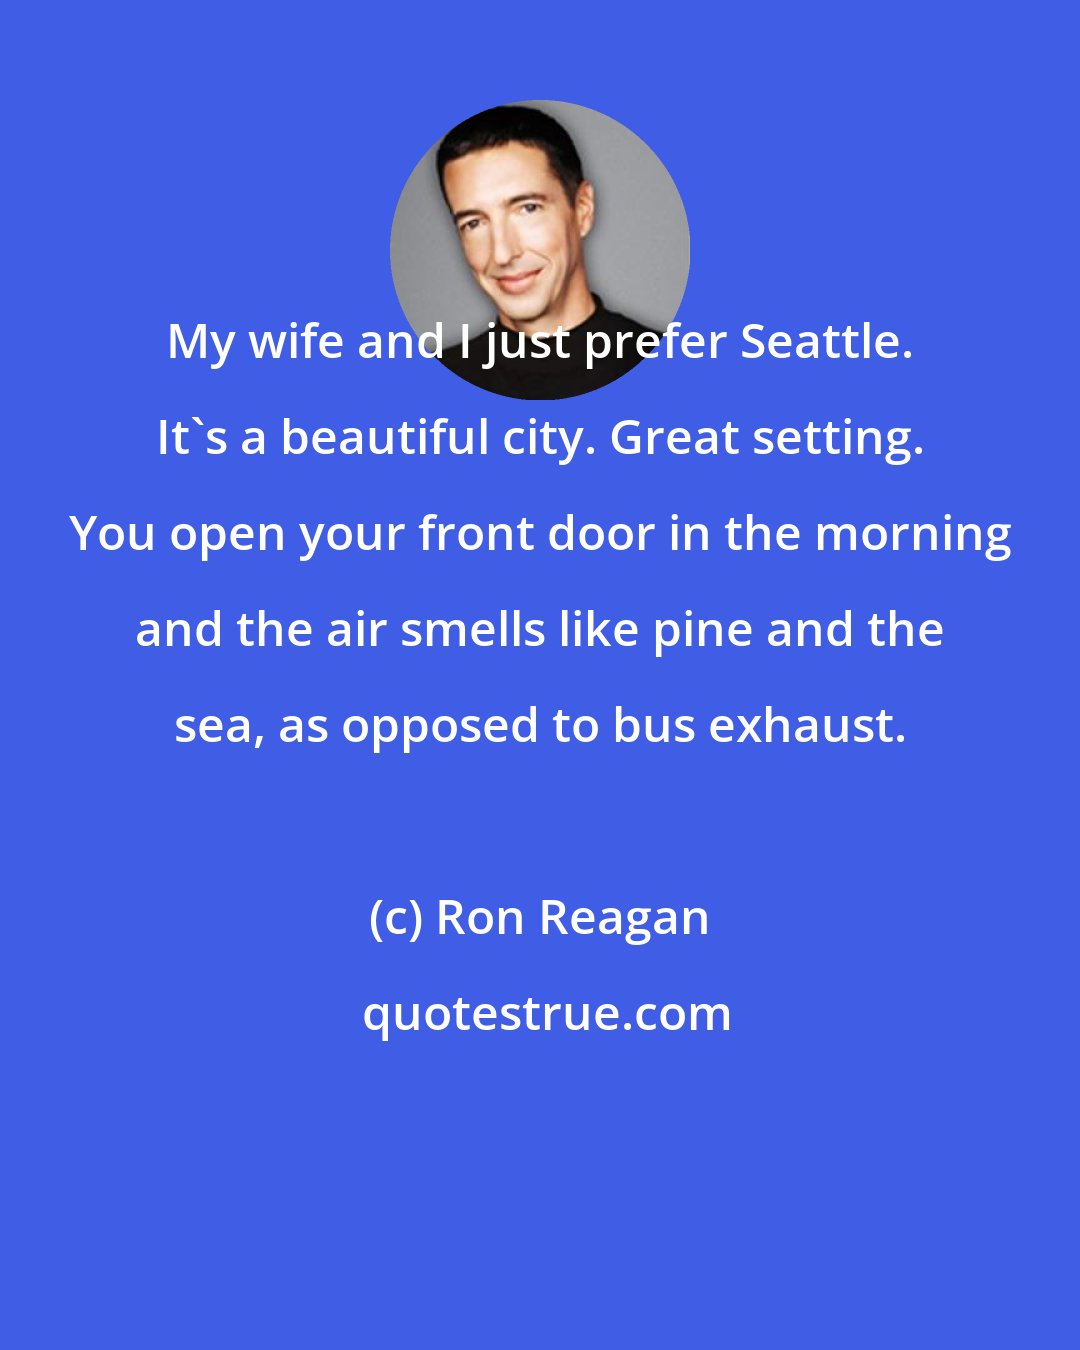 Ron Reagan: My wife and I just prefer Seattle. It's a beautiful city. Great setting. You open your front door in the morning and the air smells like pine and the sea, as opposed to bus exhaust.